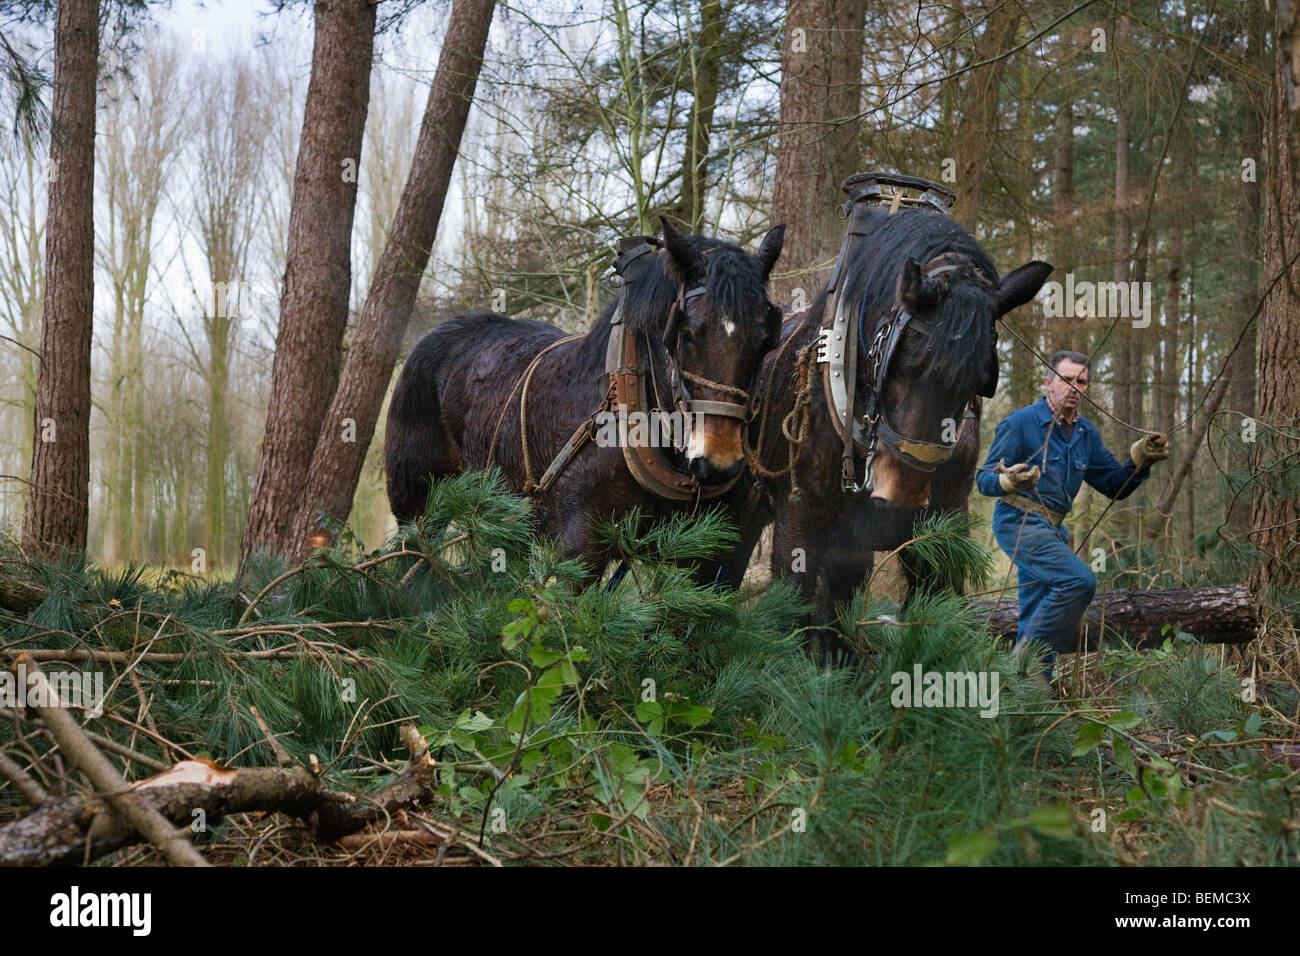 Forester dragging tree trunk / log from forest with Belgian Draft horse / Brabant Heavy Horse (Equus caballus), Belgium Stock Photo